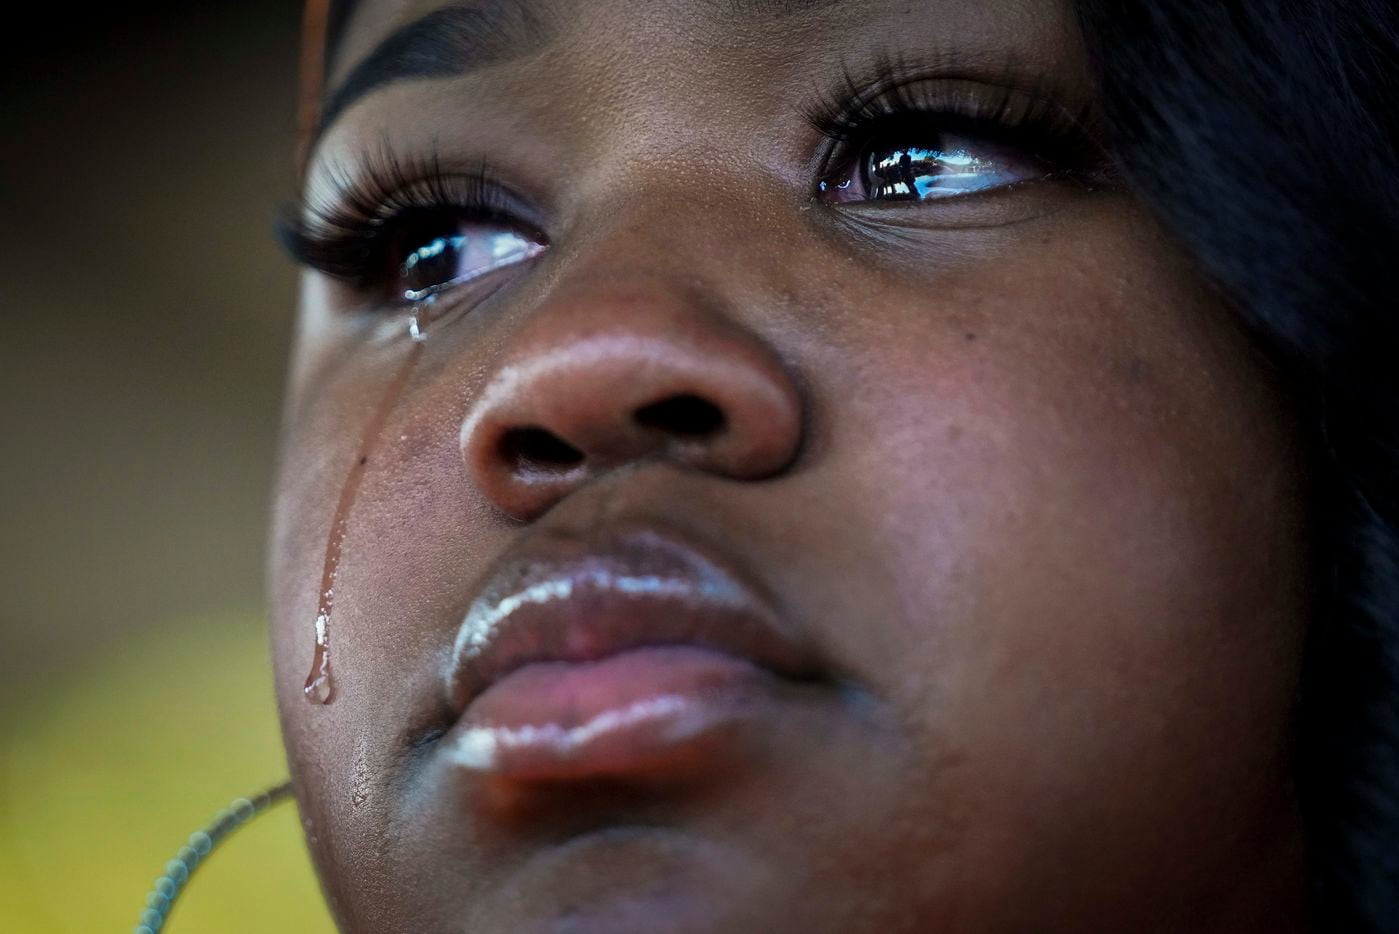 A tear runs down the cheek of MacKenzie Mitchell, one of the protest organizers, during a protest organized by Berkner High School students at Berner Park as protests continue after the death of George Floyd on Wednesday, June 3, 2020, in Richardson, Texas.